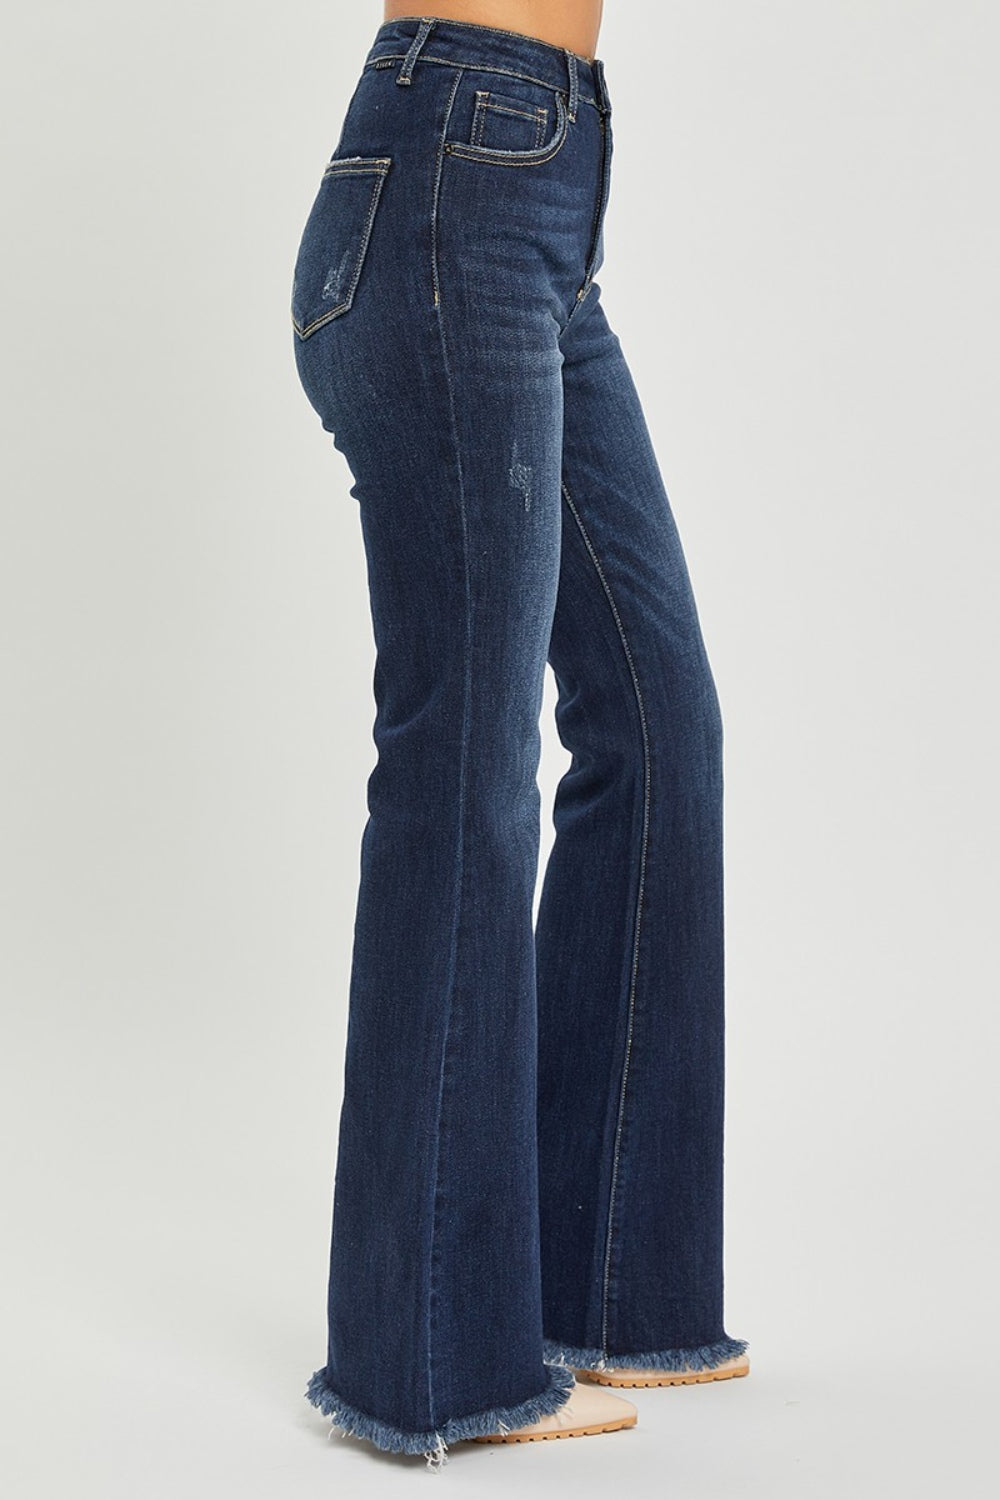 Elevate your style with RISEN's High Waist Flare Jeans featuring a trendy raw hem. Perfect blend of retro charm and modern fit for any occasion.